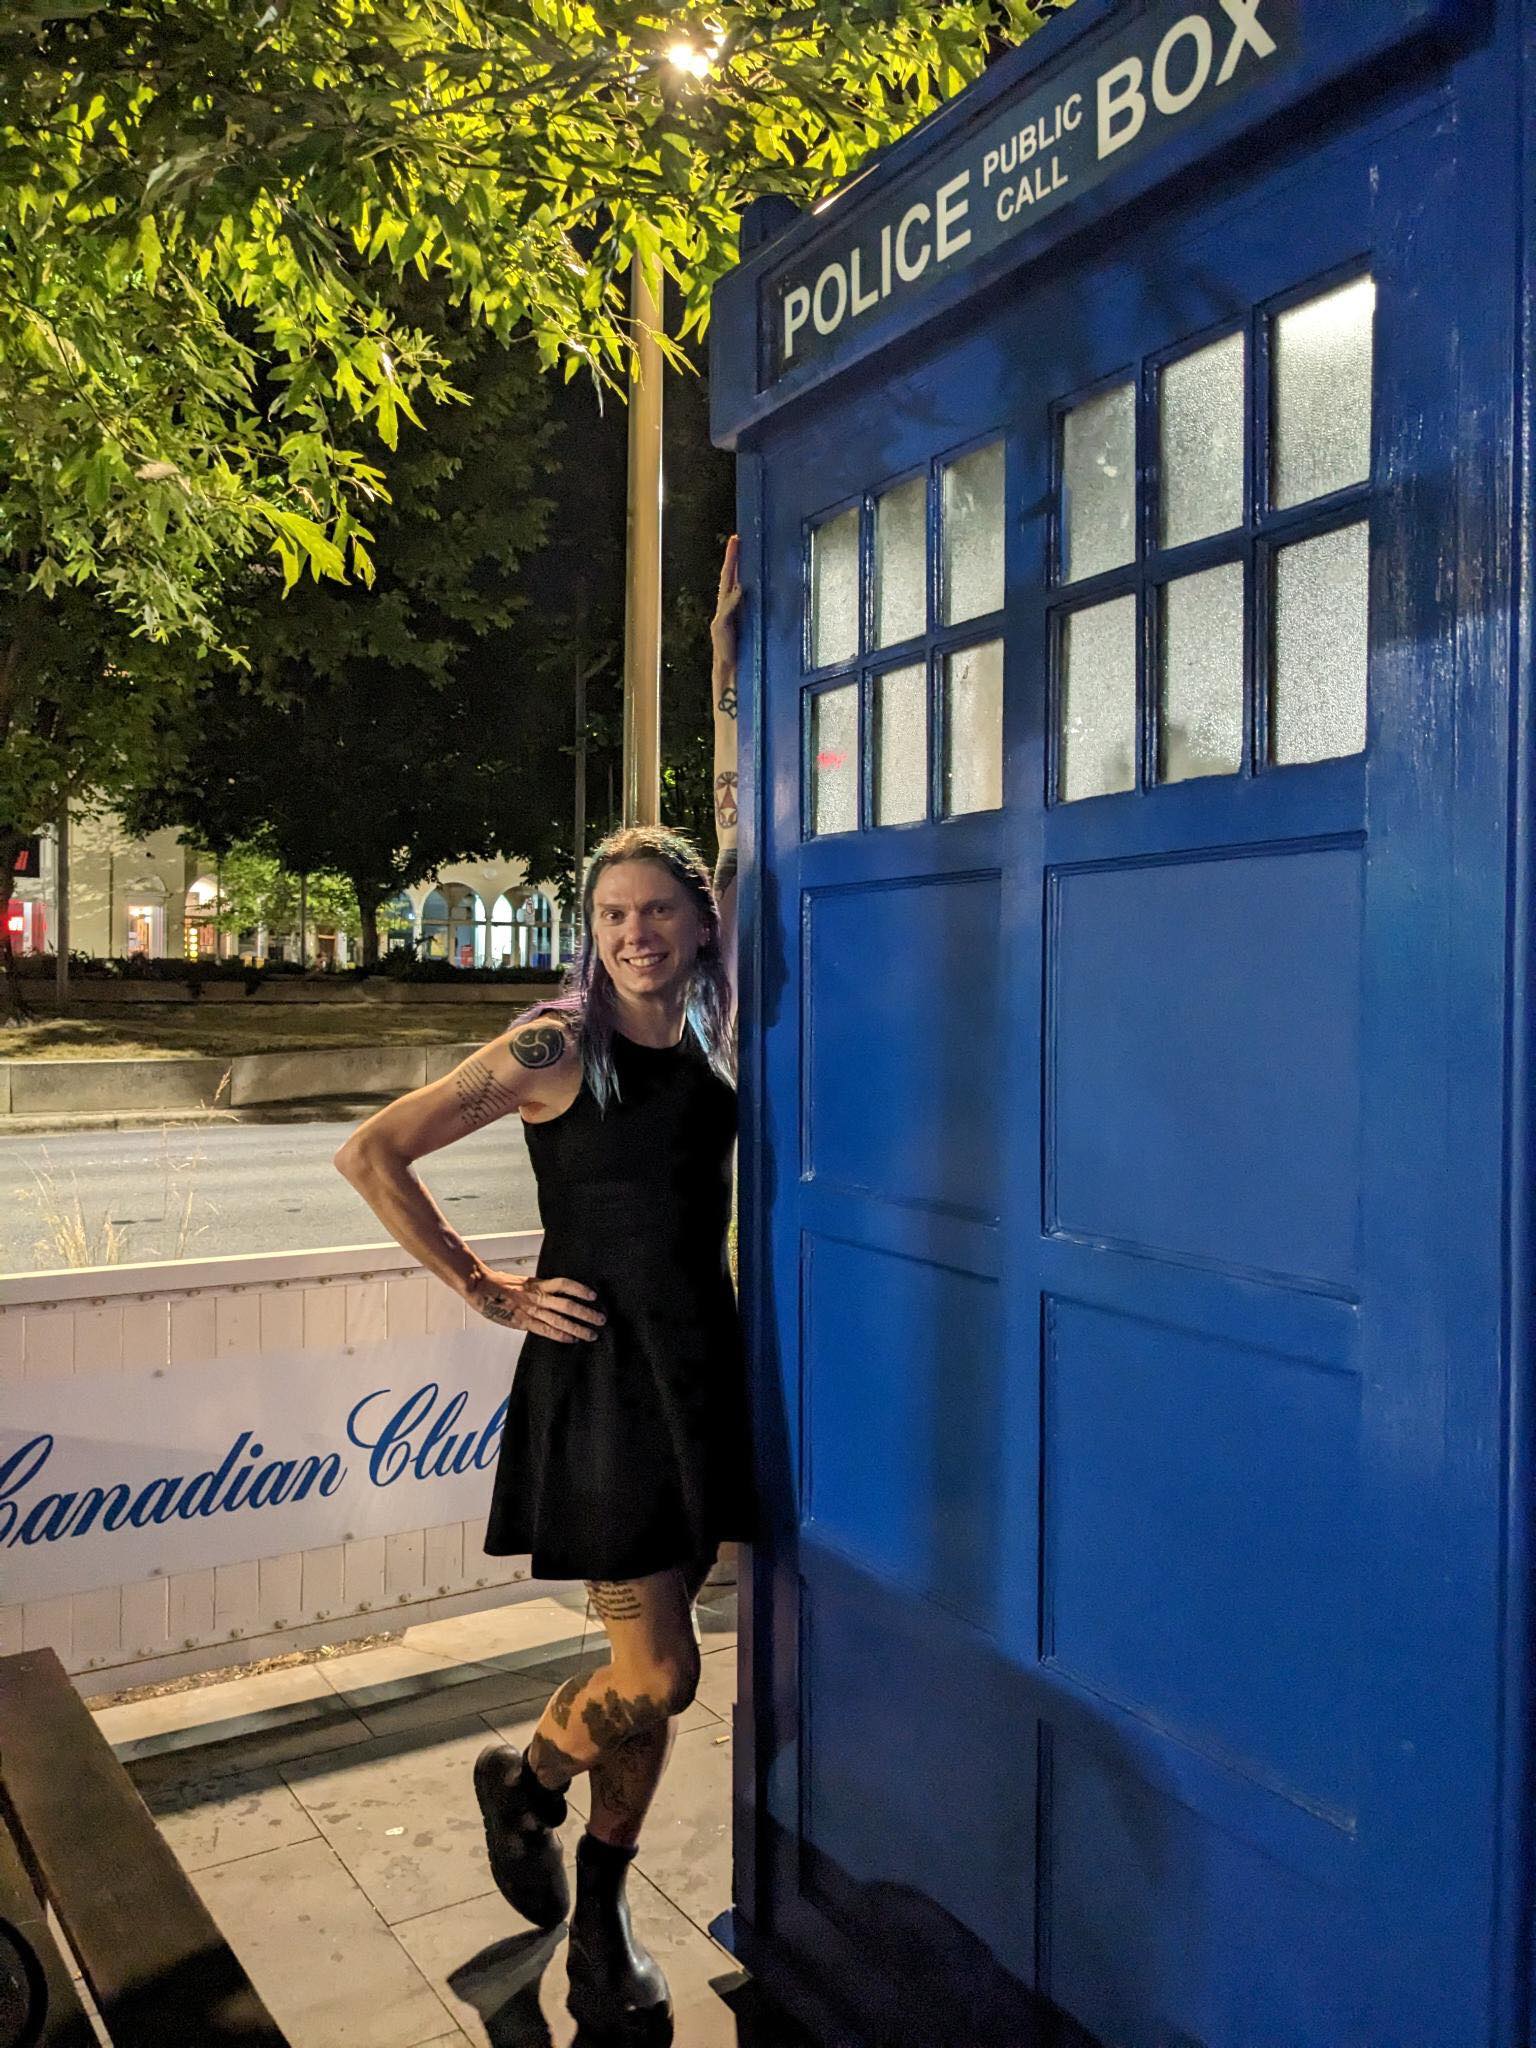 Stacey stands leaning against the TARDIS with one hand  and with one leg behind the other. It's a well-lit tree-lined street. Behind her on a low fence, in a cursive typeface, are the words Canadian Club.